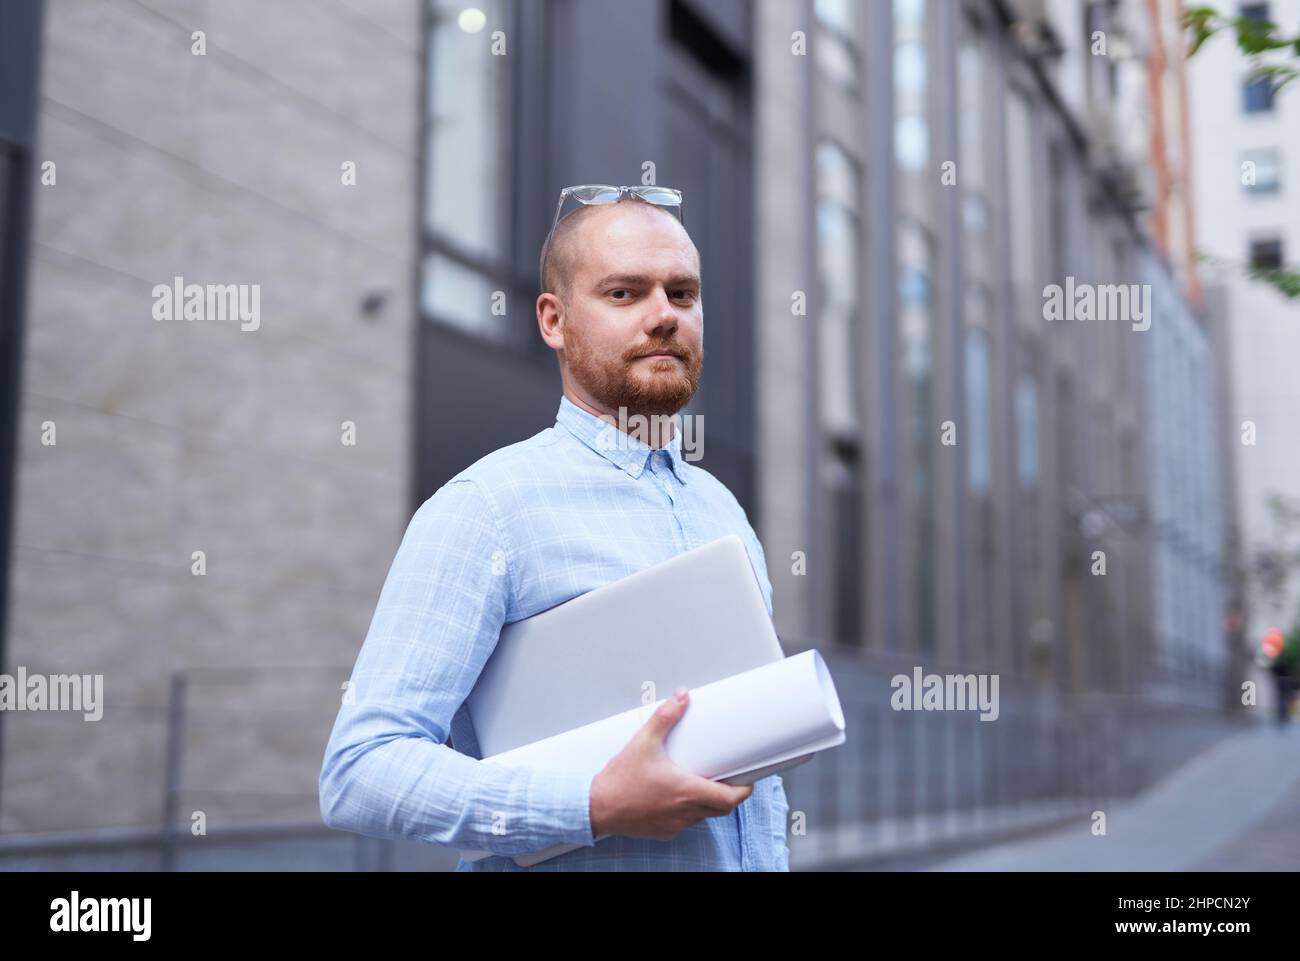 Portrait a successful and confident businessman. Young smiling stylish bearded business man standing on a street. Urban background of a modern office building in downtown. High quality image Stock Photo